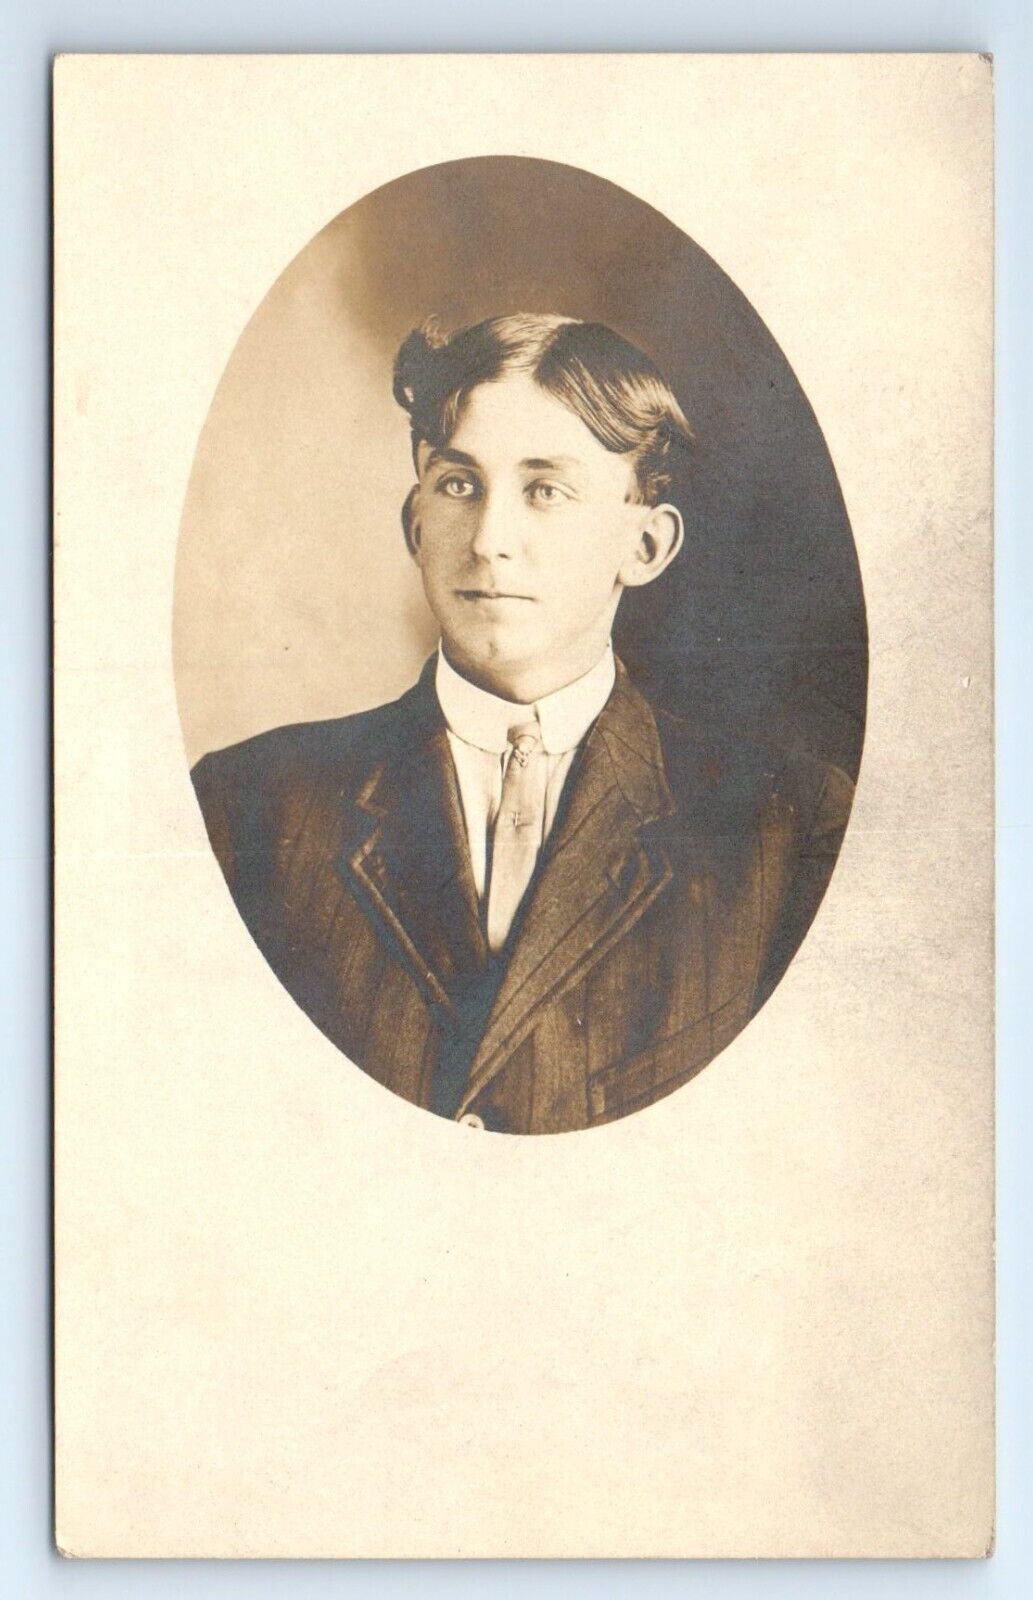 Man in Suit Portrait Handsome Young Parted Hair AZO RPPC Postcard 1904-1918